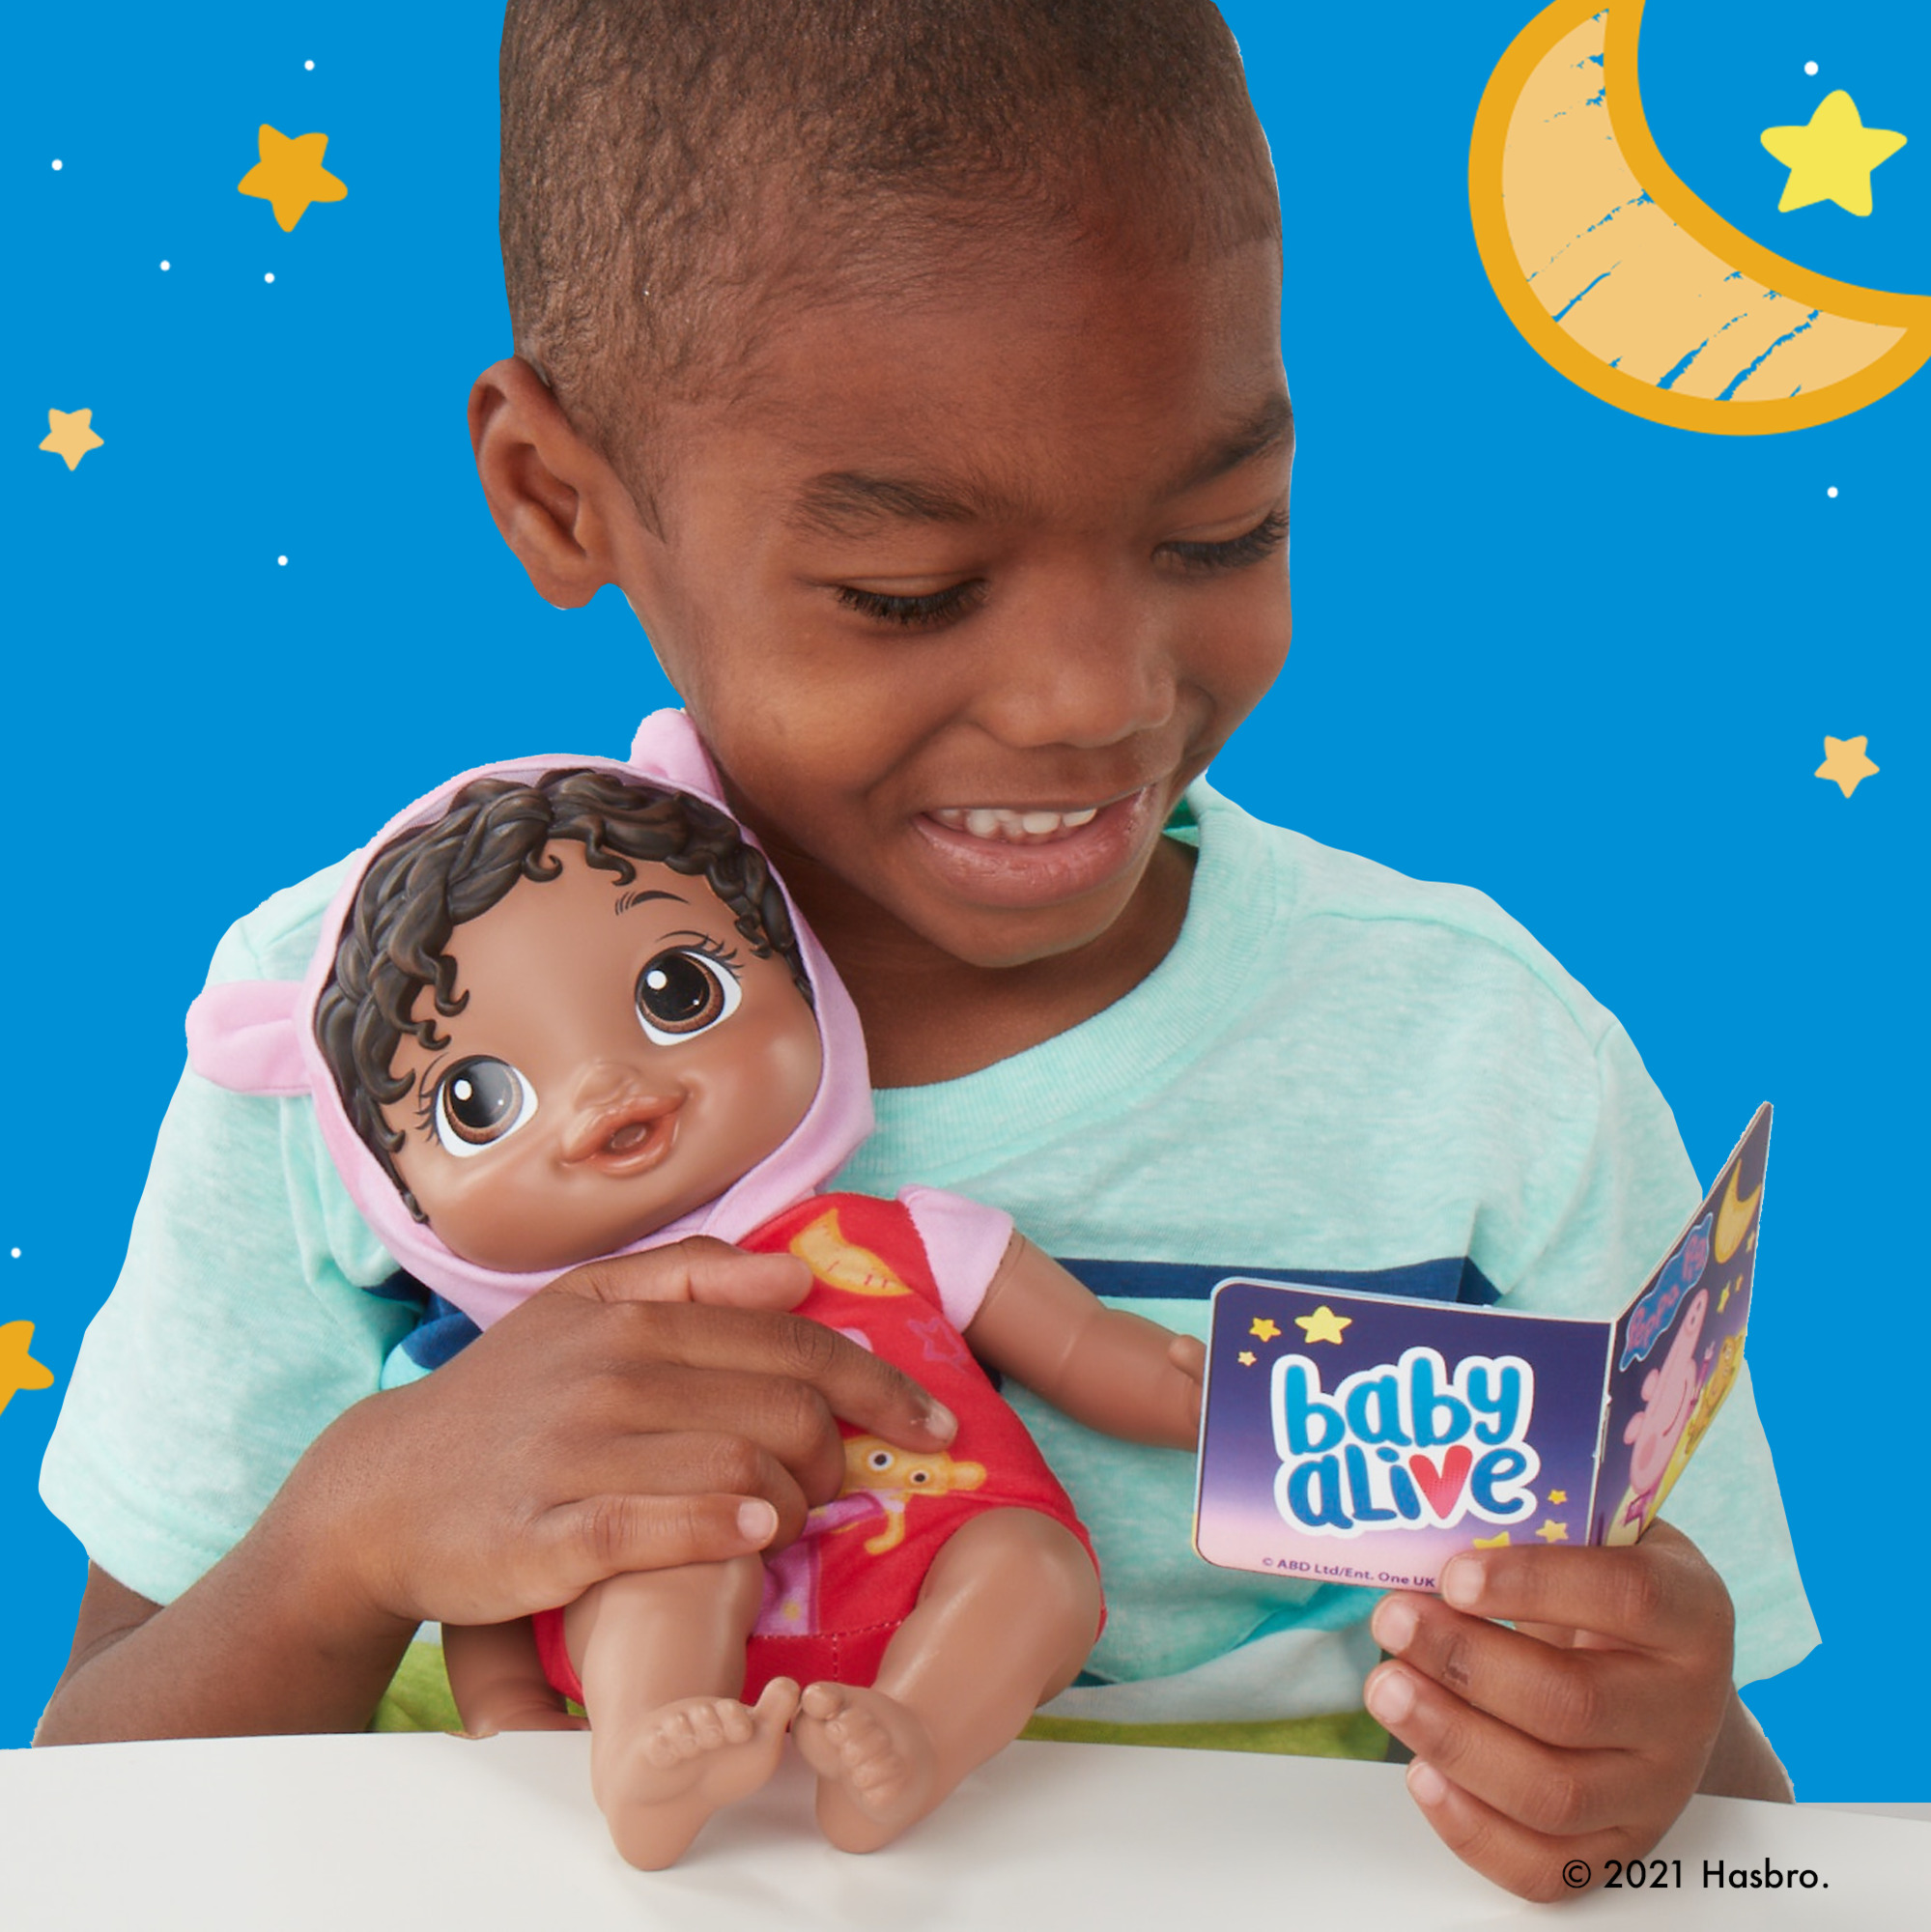 Baby Alive Goodnight Doll, Peppa Pig Toy, Soft, Kids 2 and Up, Black Hair, Only At Walmart - image 4 of 10